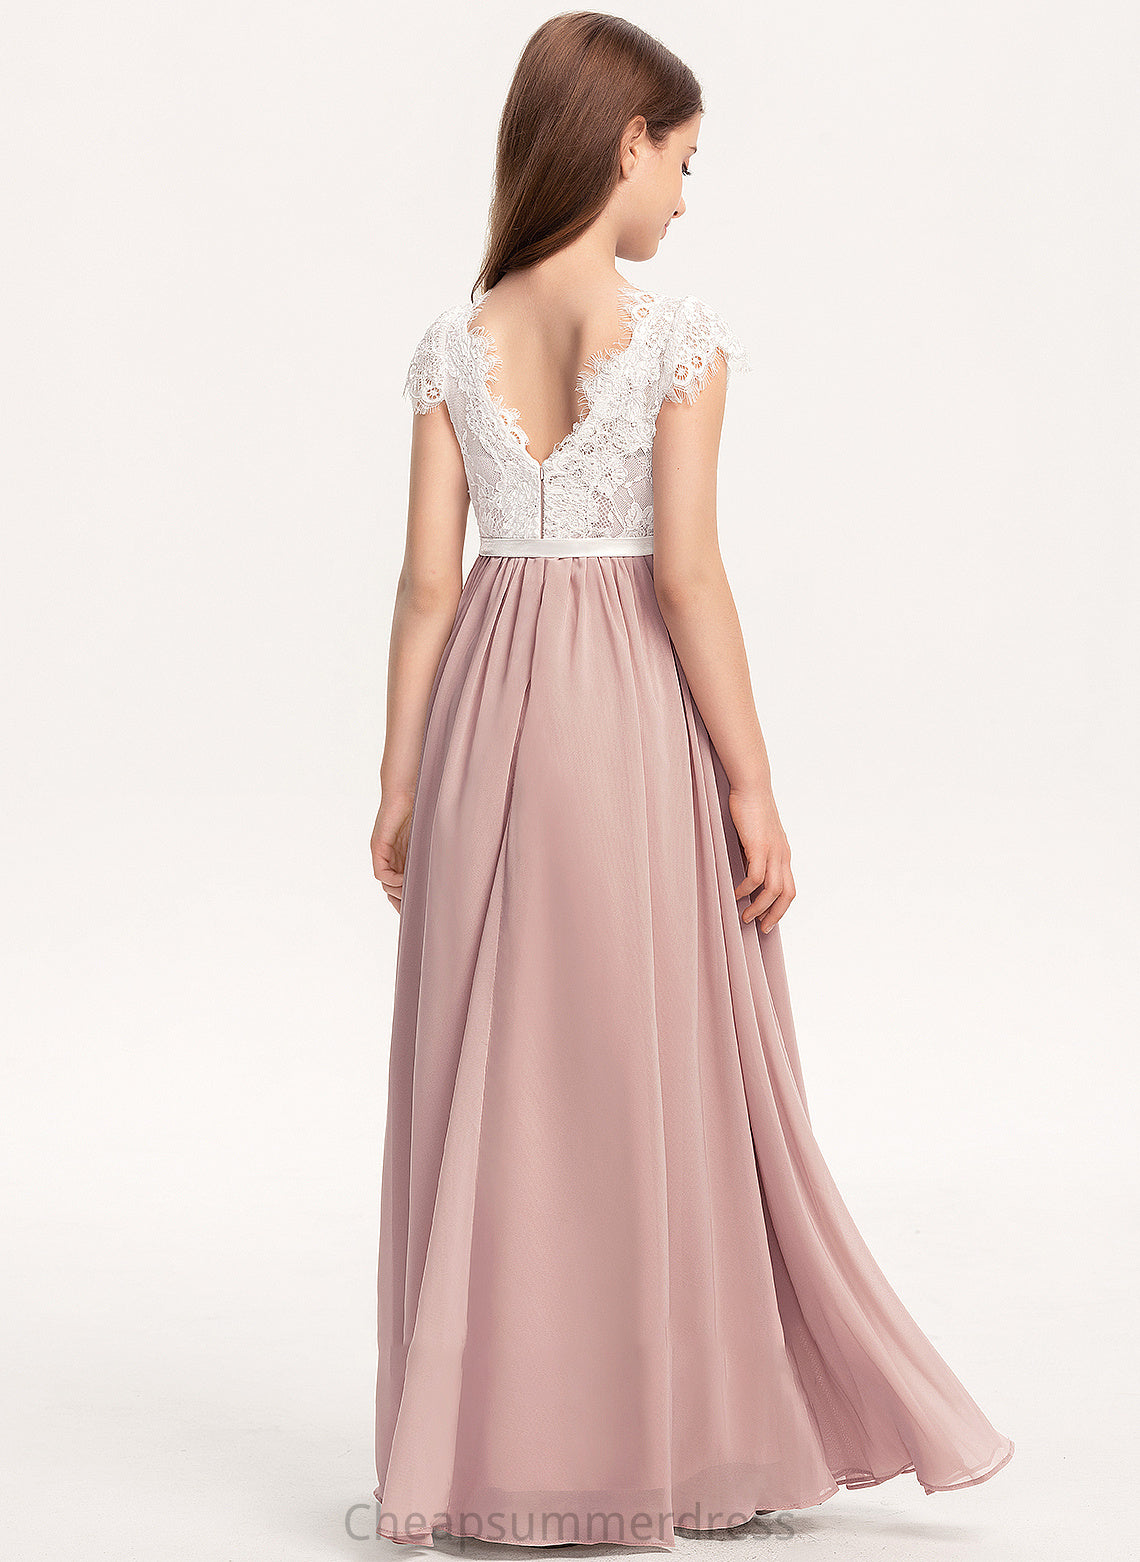 Kinley With Scoop A-Line Neck Lace Bow(s) Floor-Length Junior Bridesmaid Dresses Chiffon